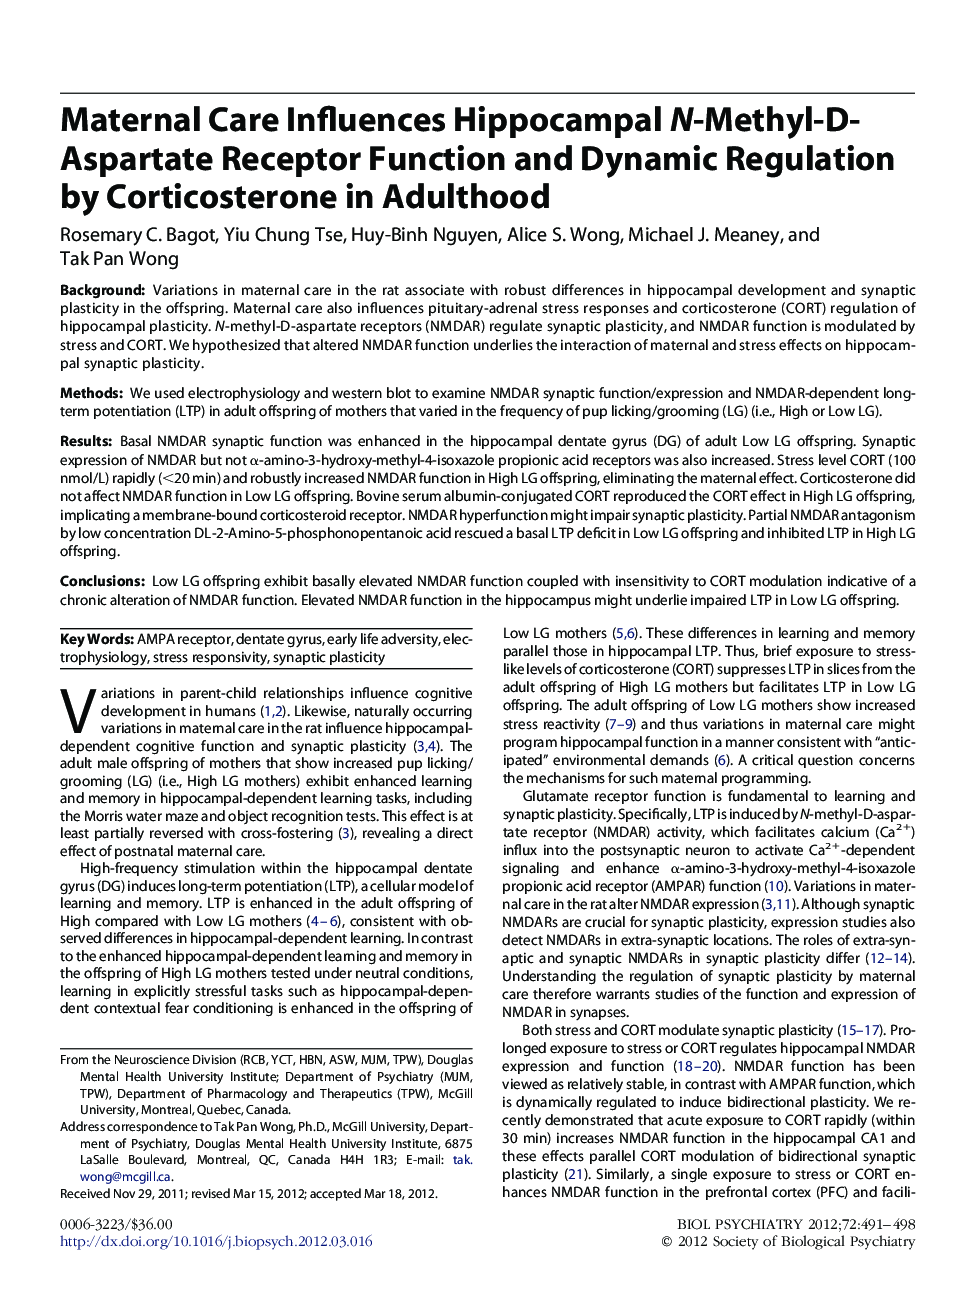 Maternal Care Influences Hippocampal N-Methyl-D-Aspartate Receptor Function and Dynamic Regulation by Corticosterone in Adulthood